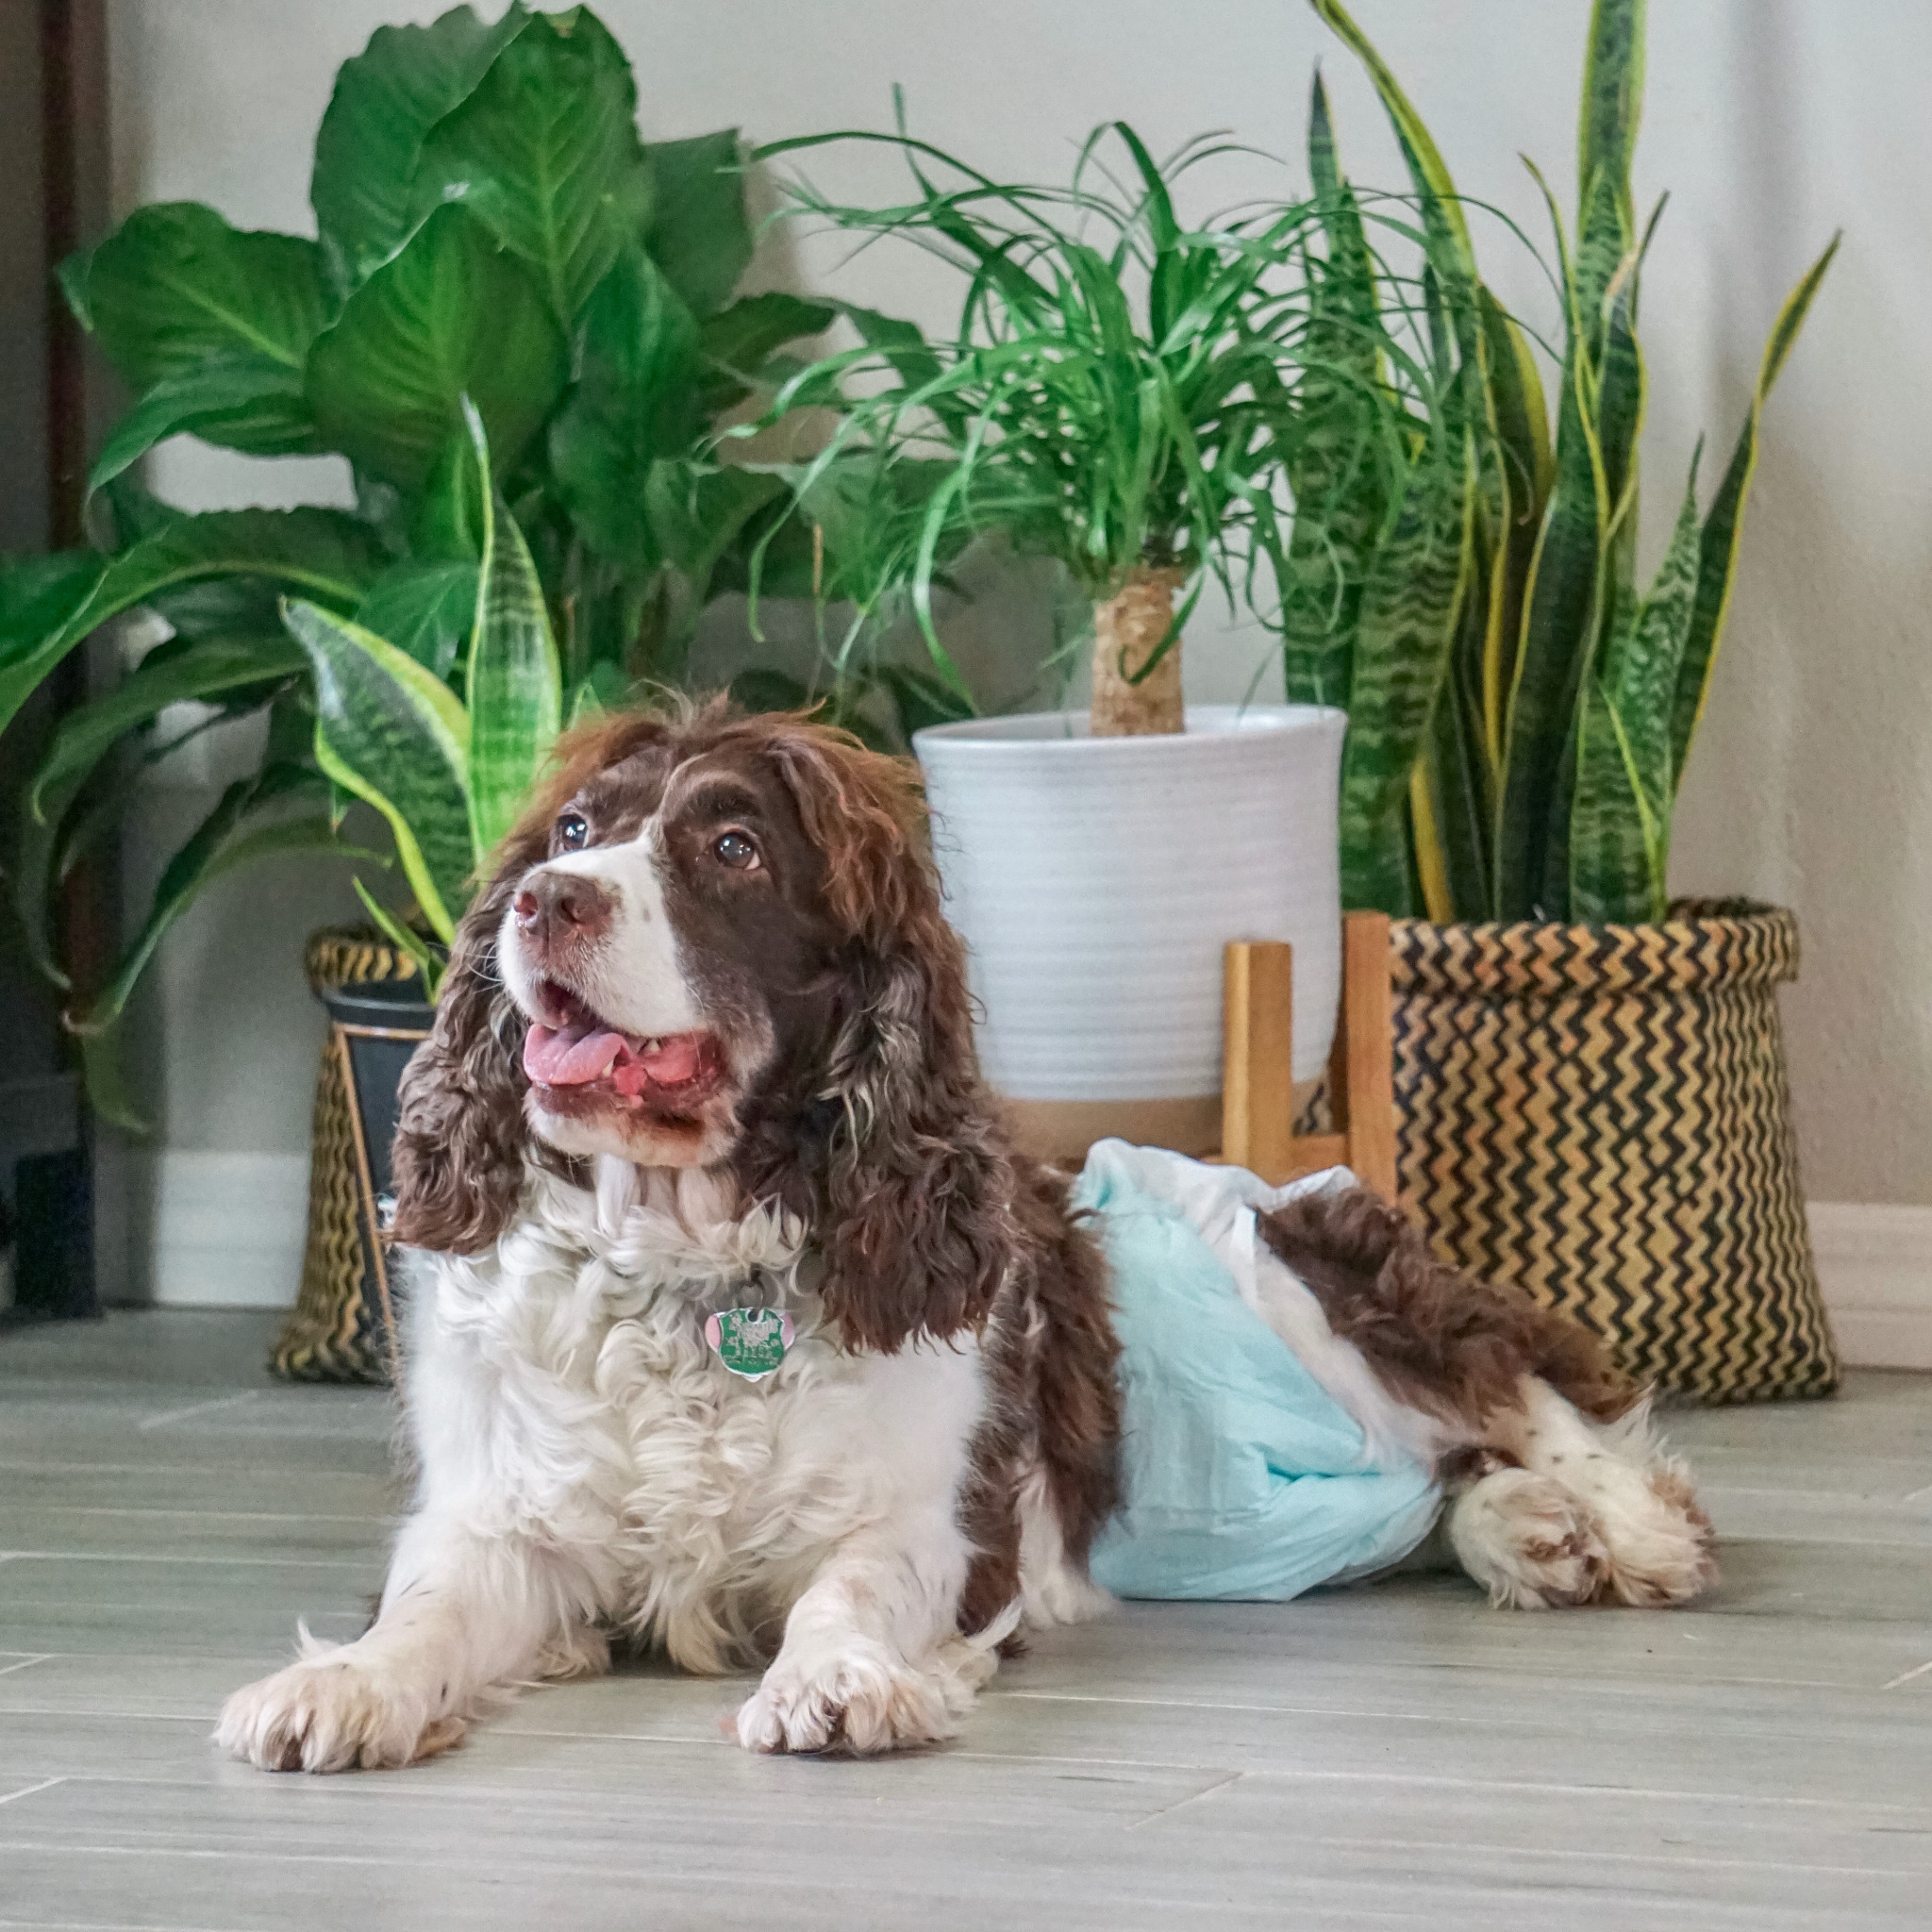 Managing Dog Incontinence With Dog Diapers